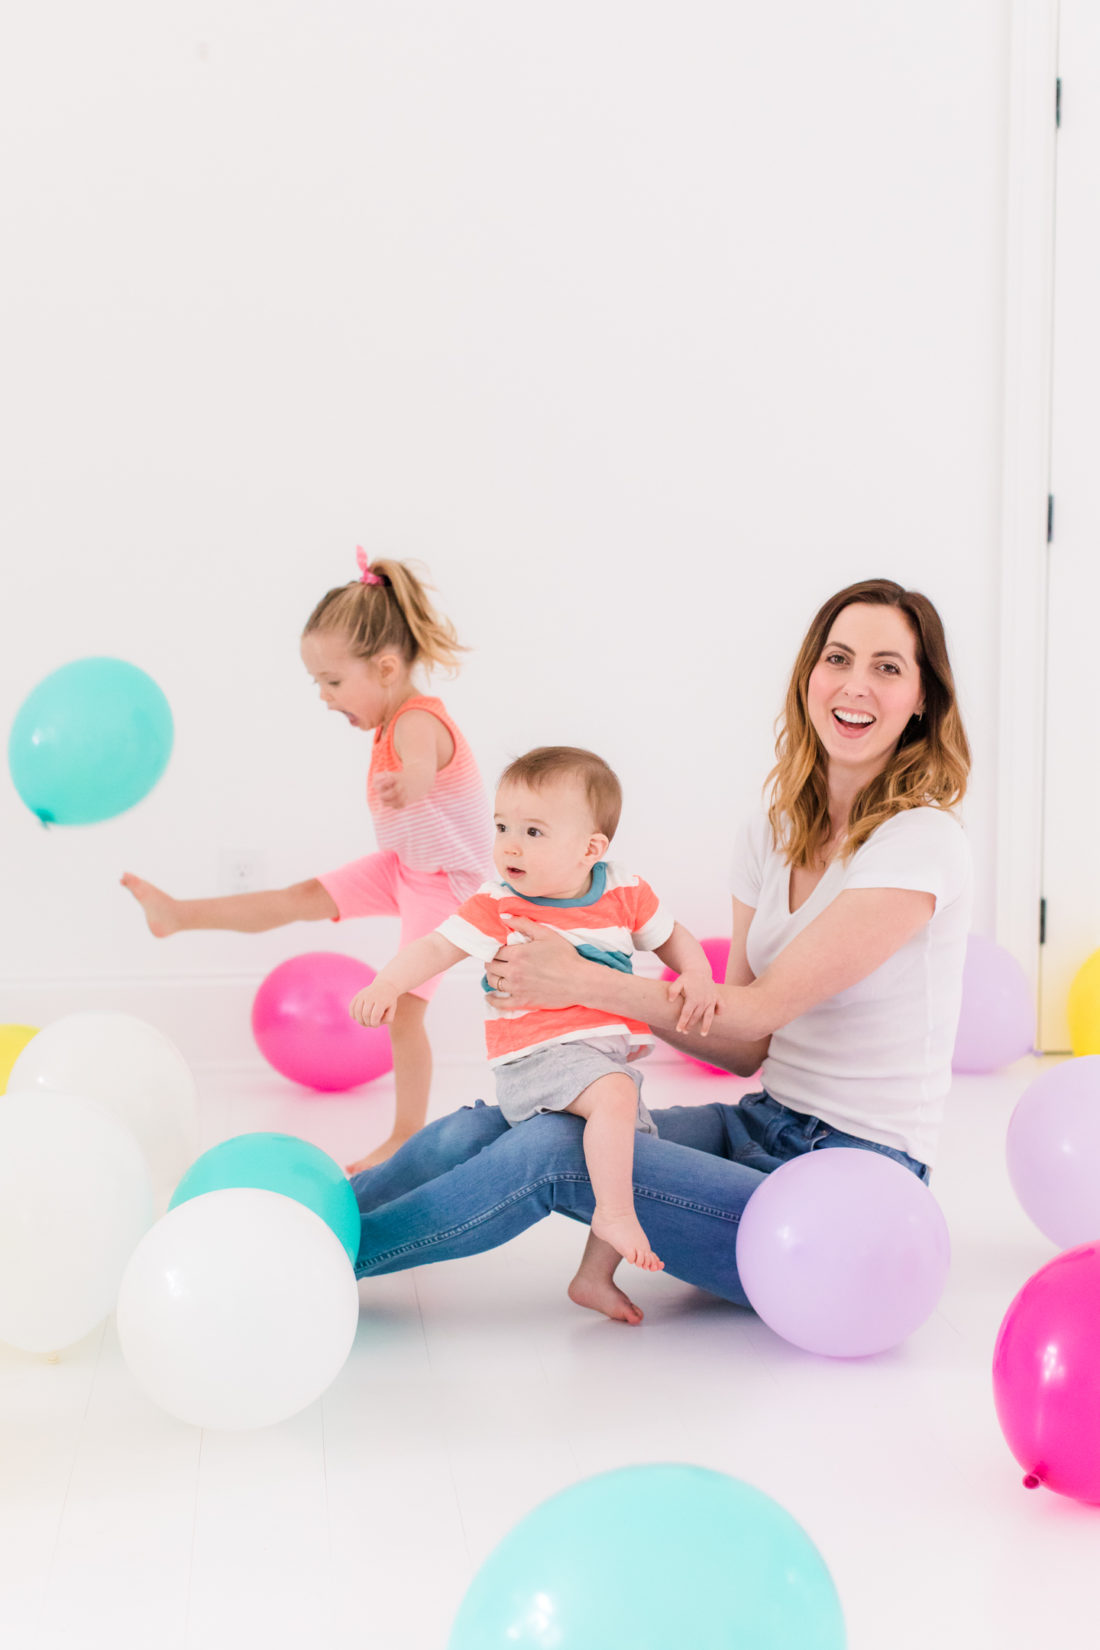 Eva Amurri Martino stands in the Happily Eva After studio filled with balloons to celebrate the second anniversary of the blog